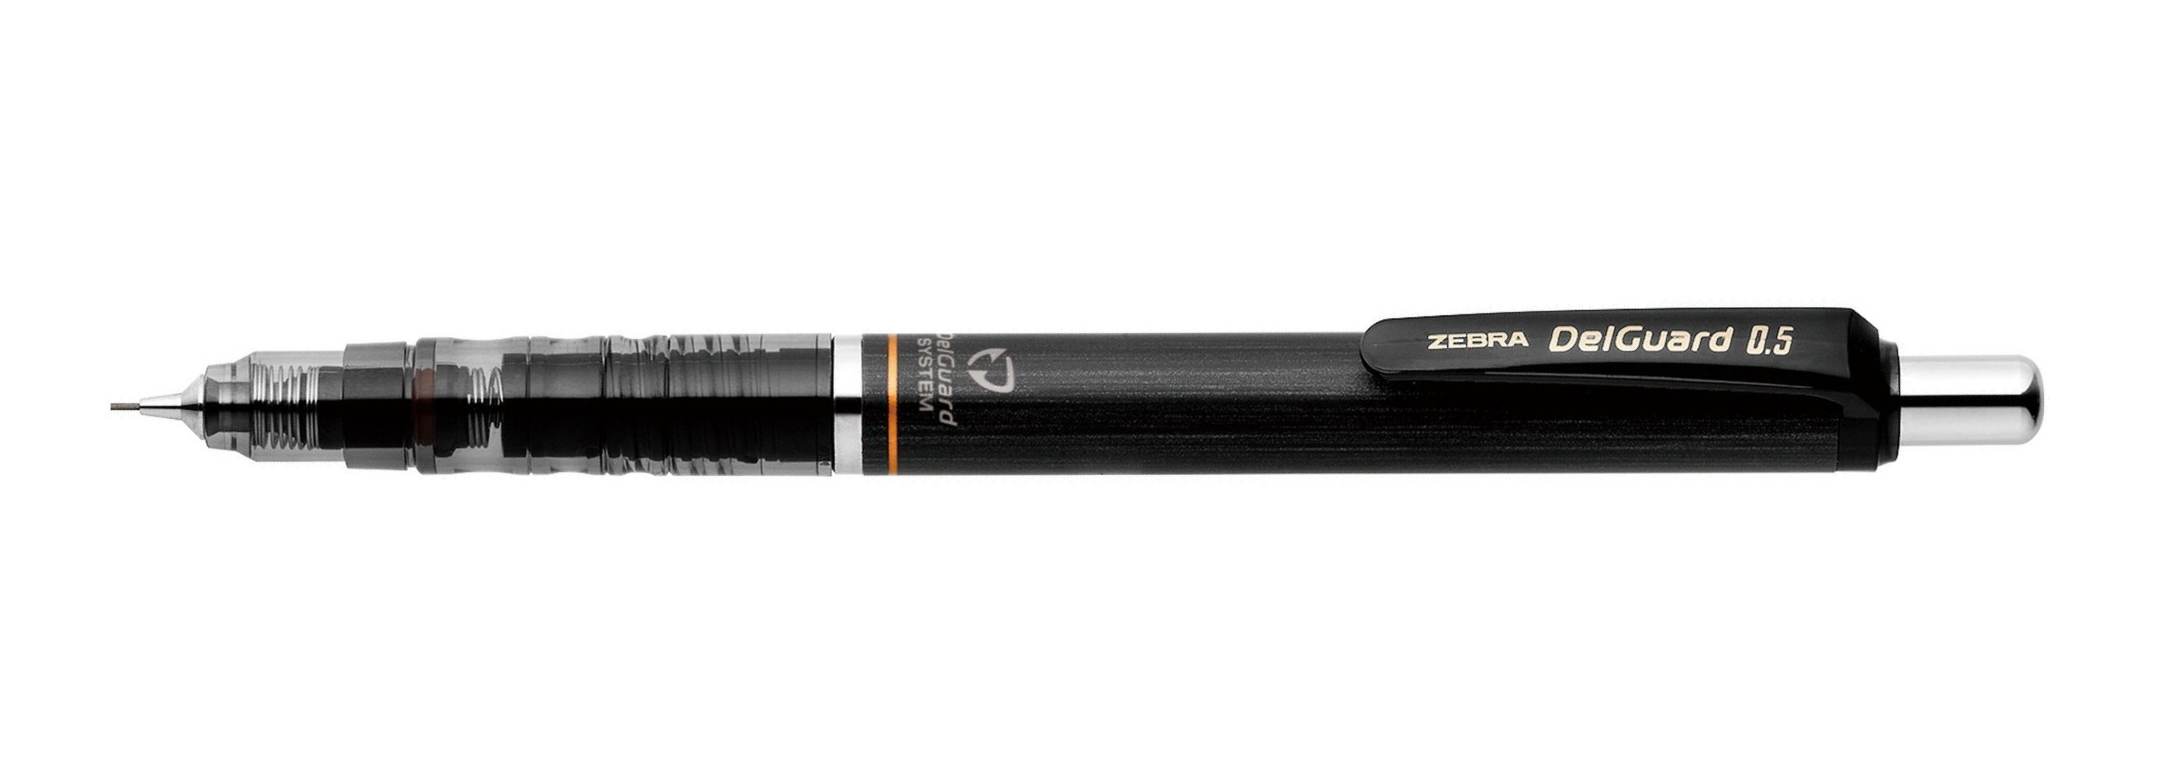 pacer pencil